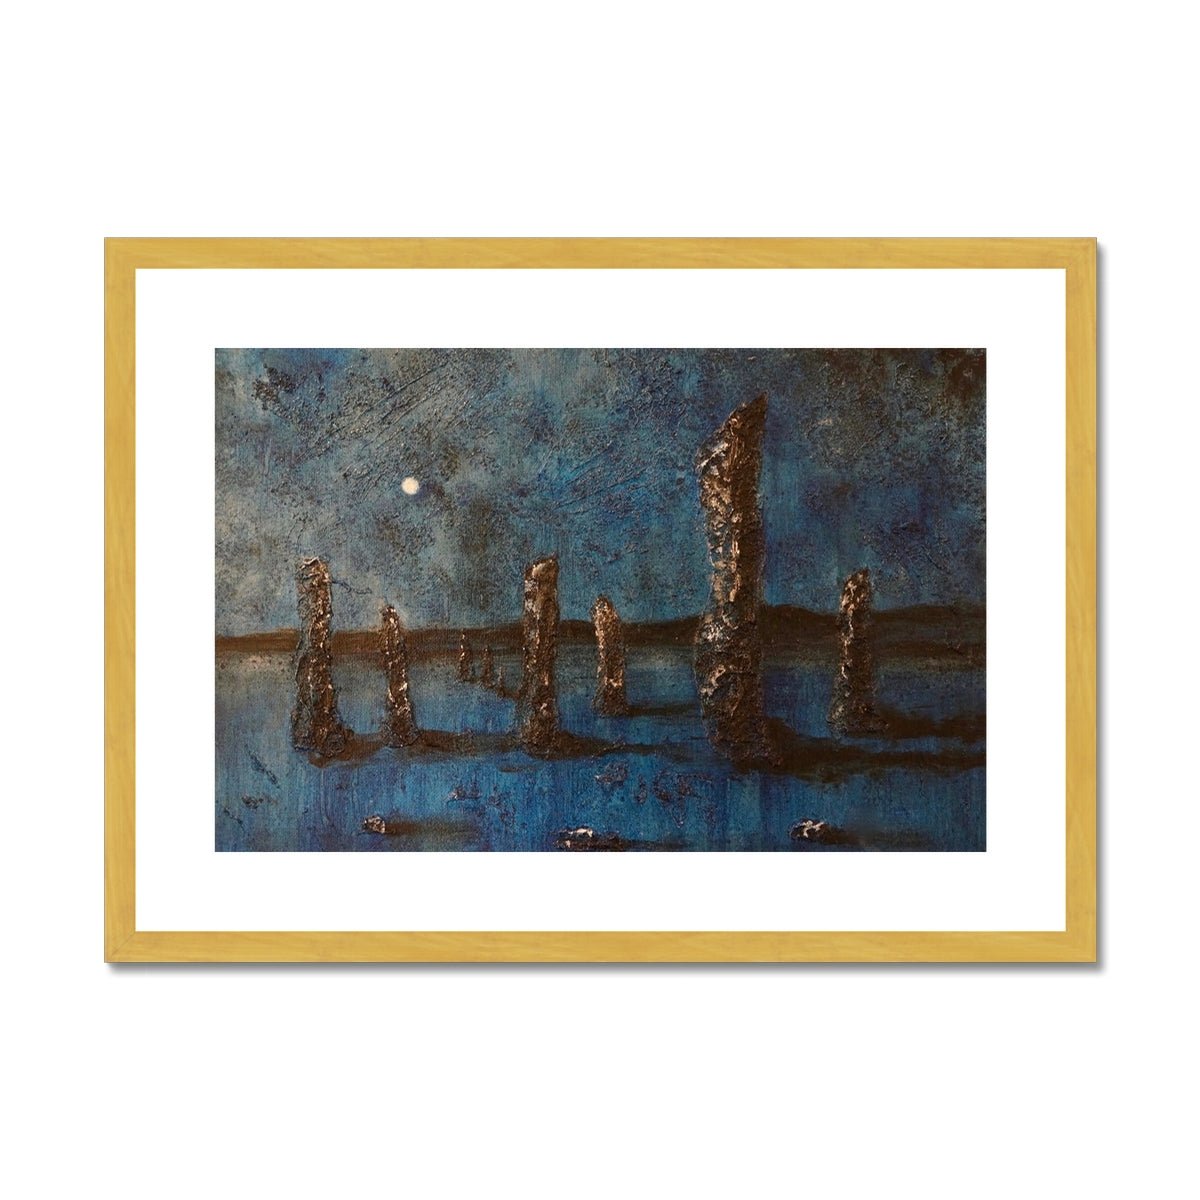 Callanish Moonlight Lewis Painting | Antique Framed & Mounted Prints From Scotland-Antique Framed & Mounted Prints-Hebridean Islands Art Gallery-A2 Landscape-Gold Frame-Paintings, Prints, Homeware, Art Gifts From Scotland By Scottish Artist Kevin Hunter